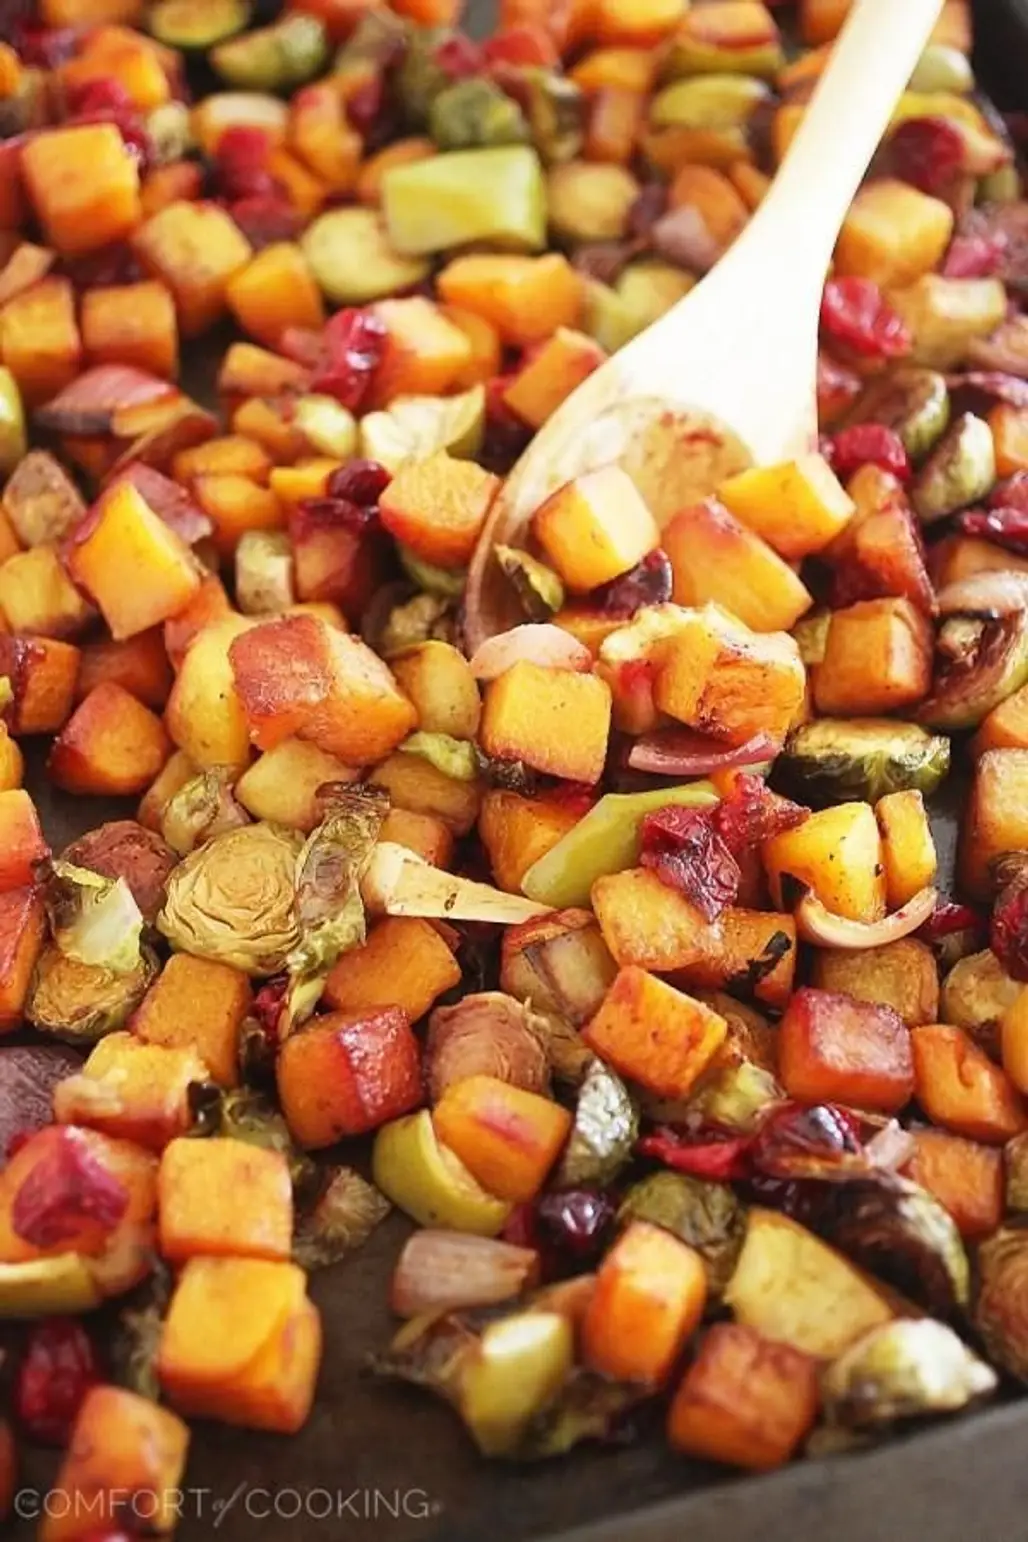 Roasted Butternut Squash and Brussels Sprouts with Cranberries, Apples and Onions